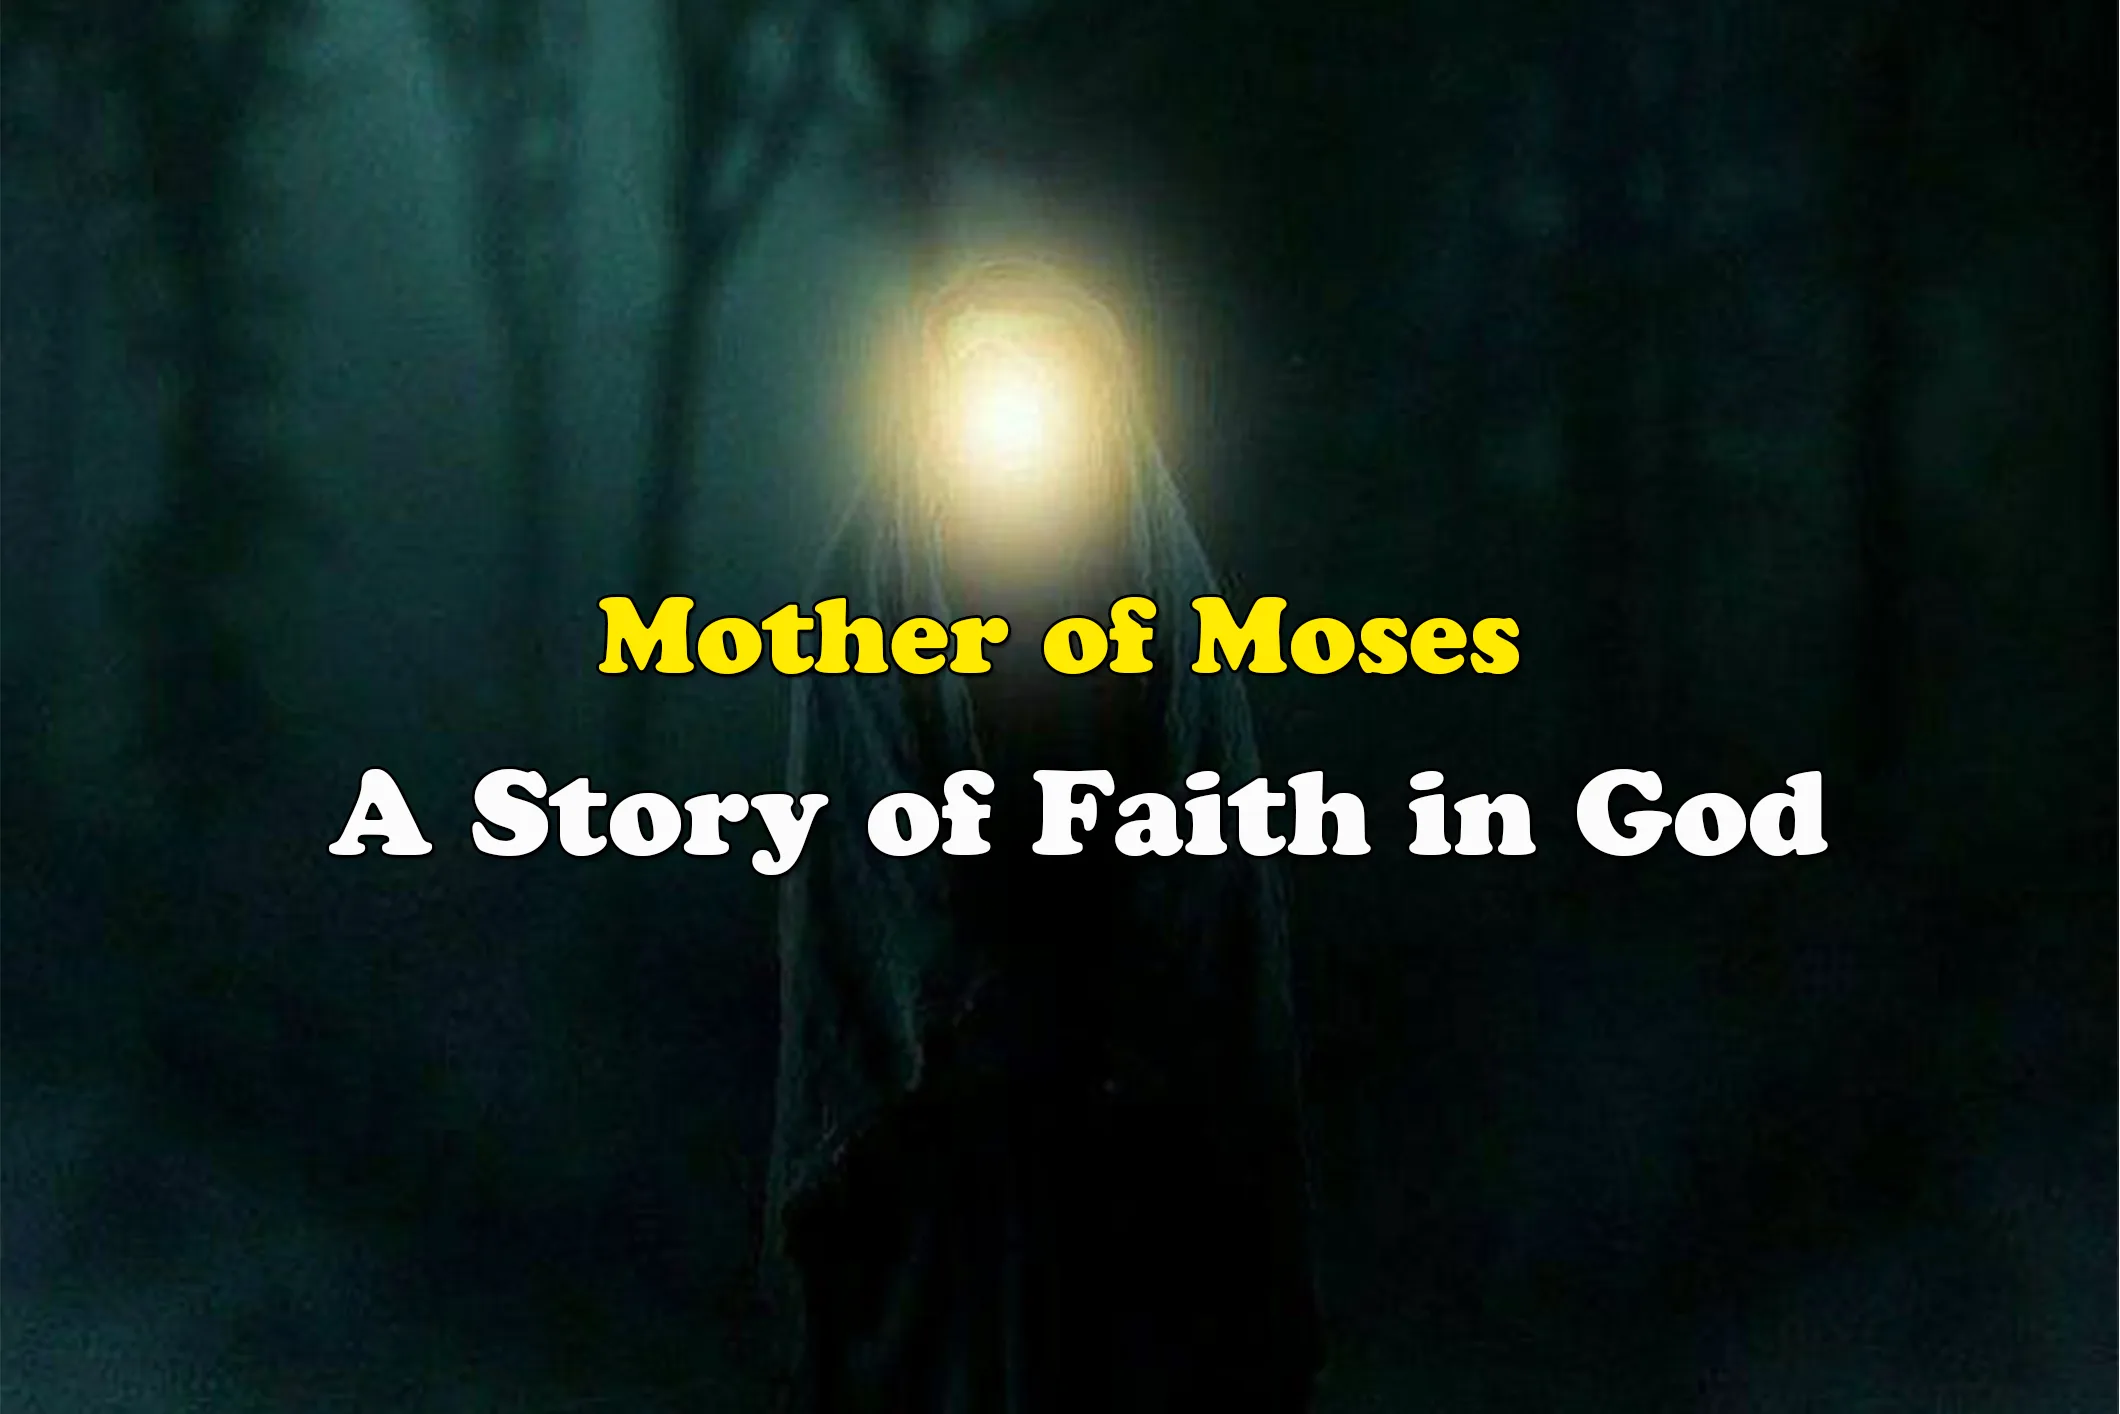 Mother of Moses: A Story of Faith in God